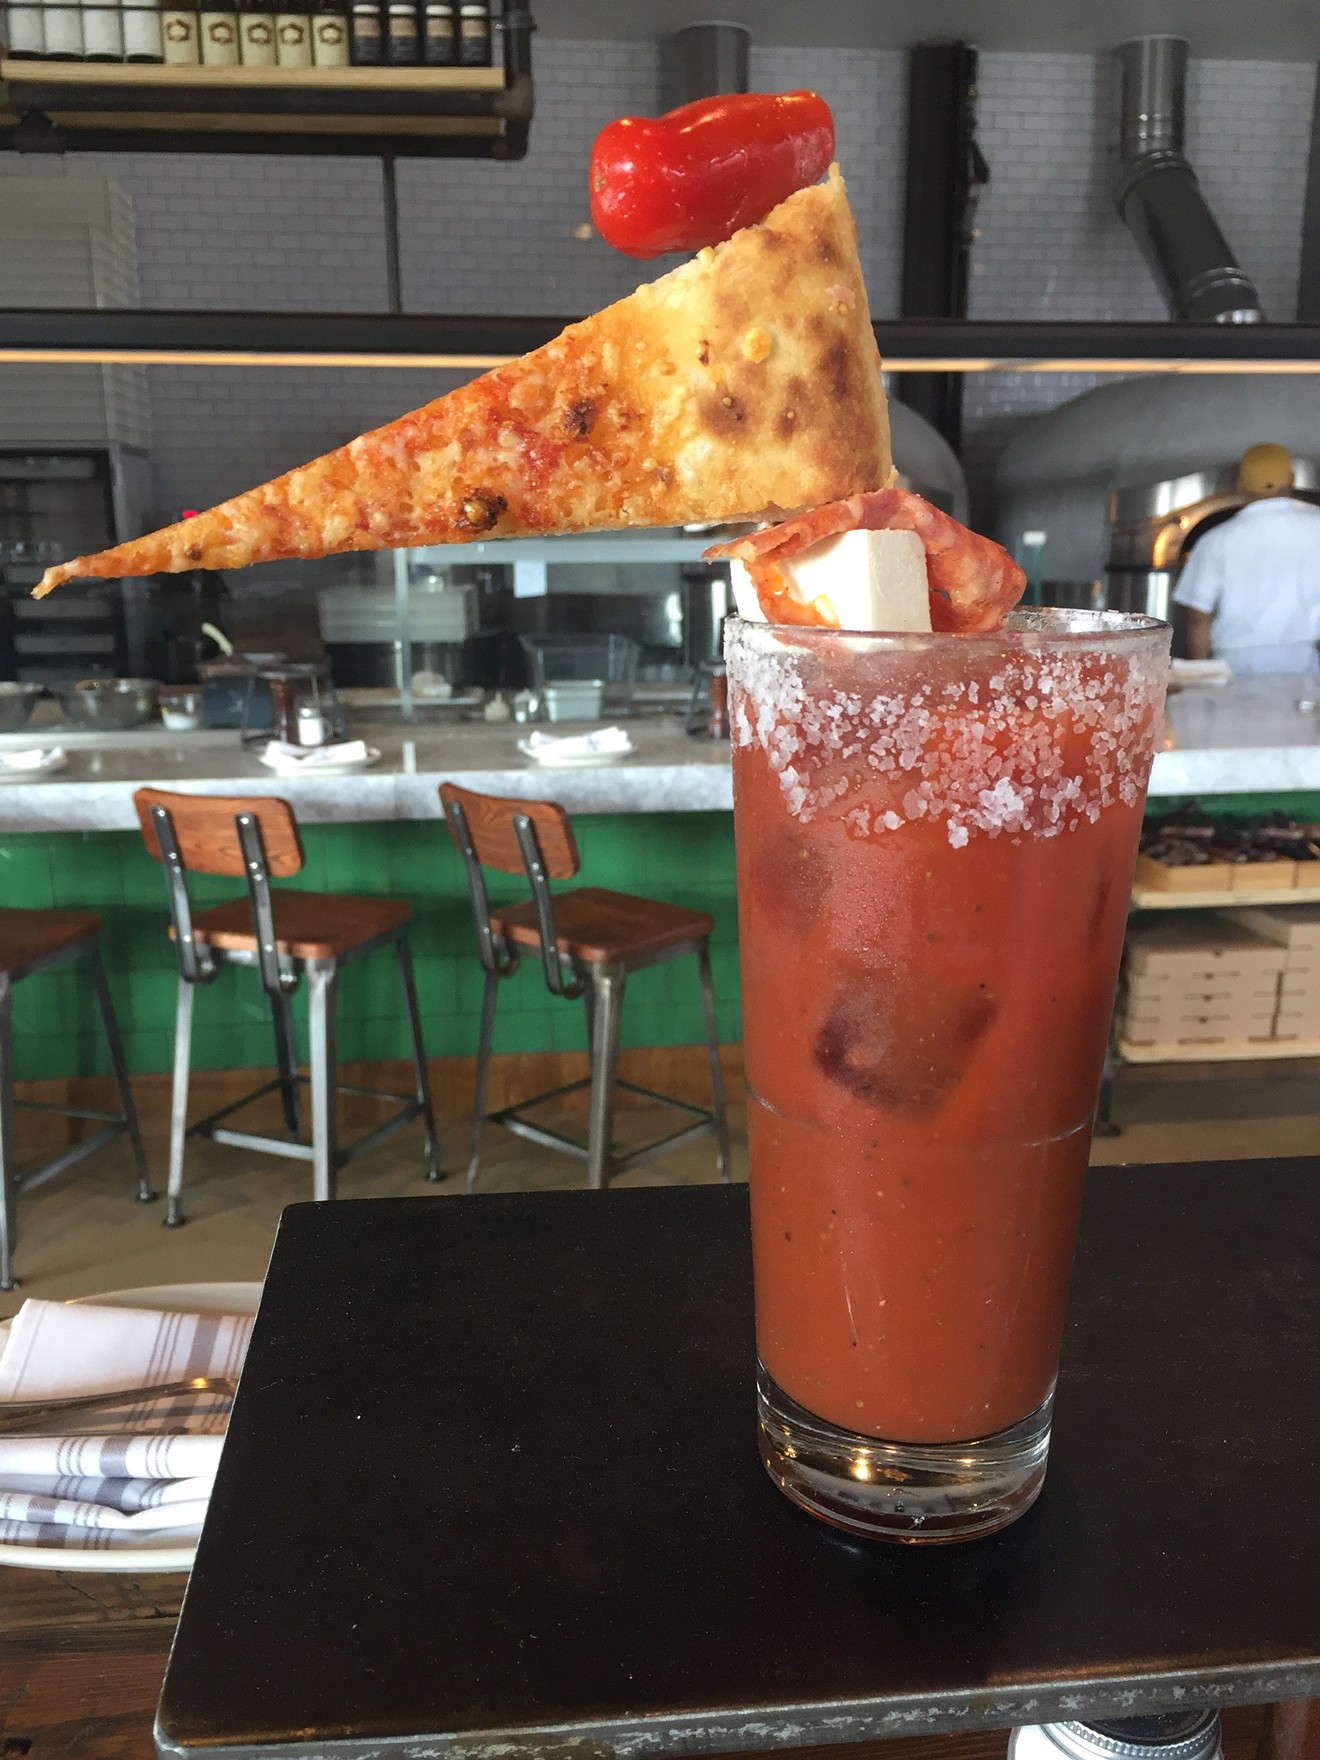 They do pizza so well, they even put a slice on their drinks.